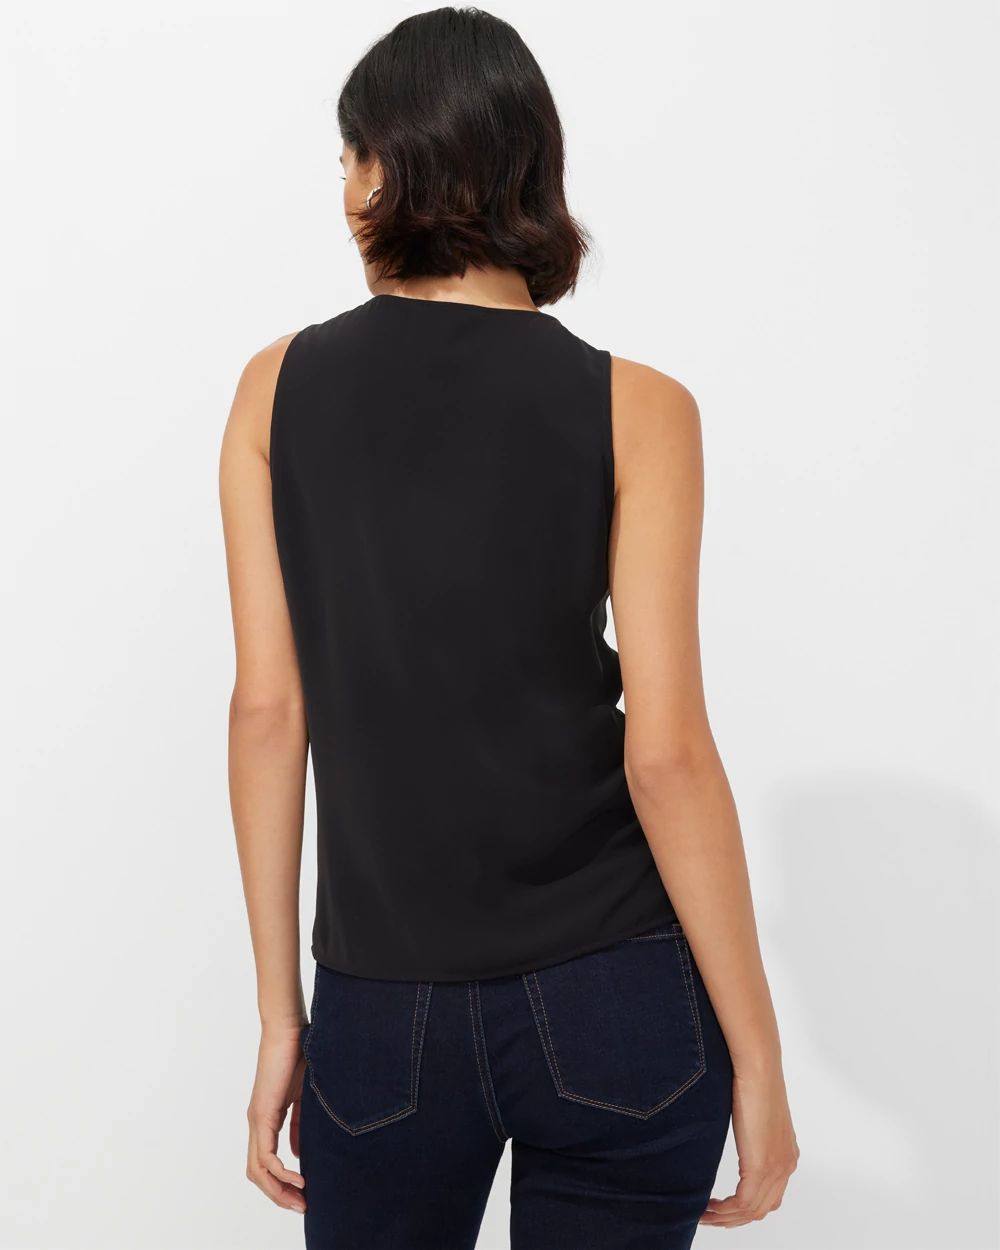 Outlet WHBM Embroidered Cutout V-Tank Top click to view larger image.